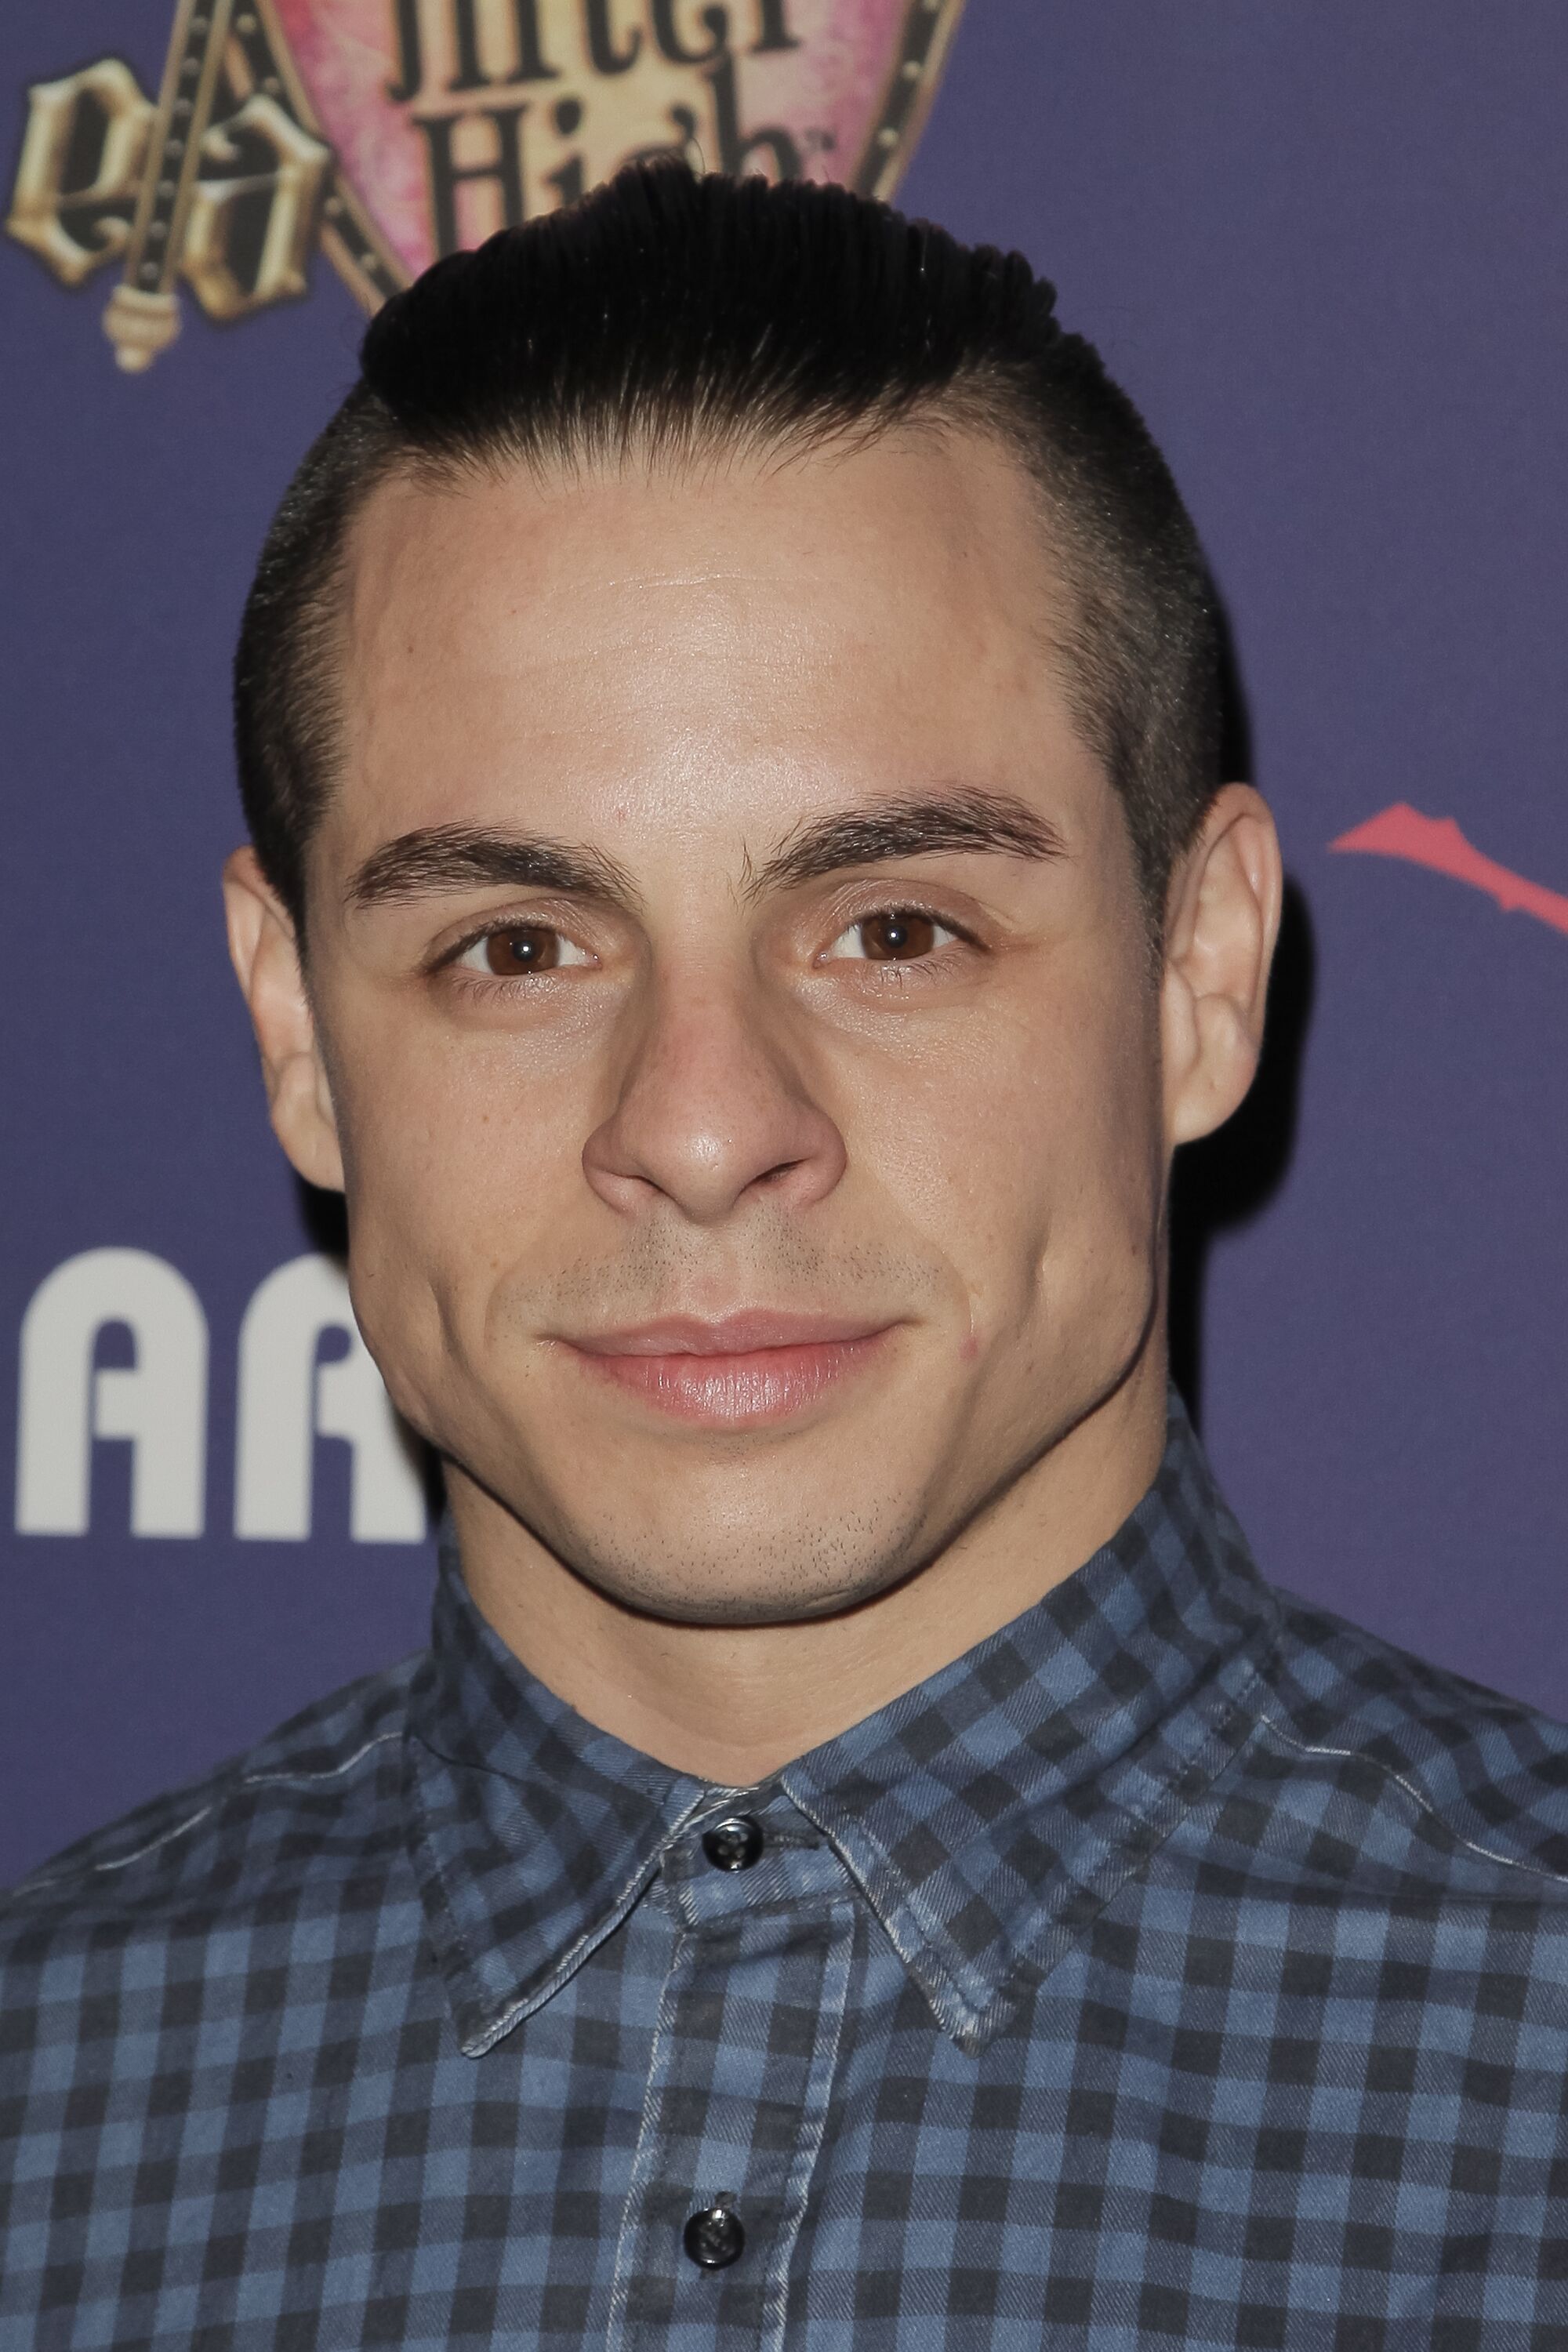 Dancer and choreographer Casper Smart at the at Dreamworks Animation's 'Home' Premiere in 2015 | Source: Getty Images